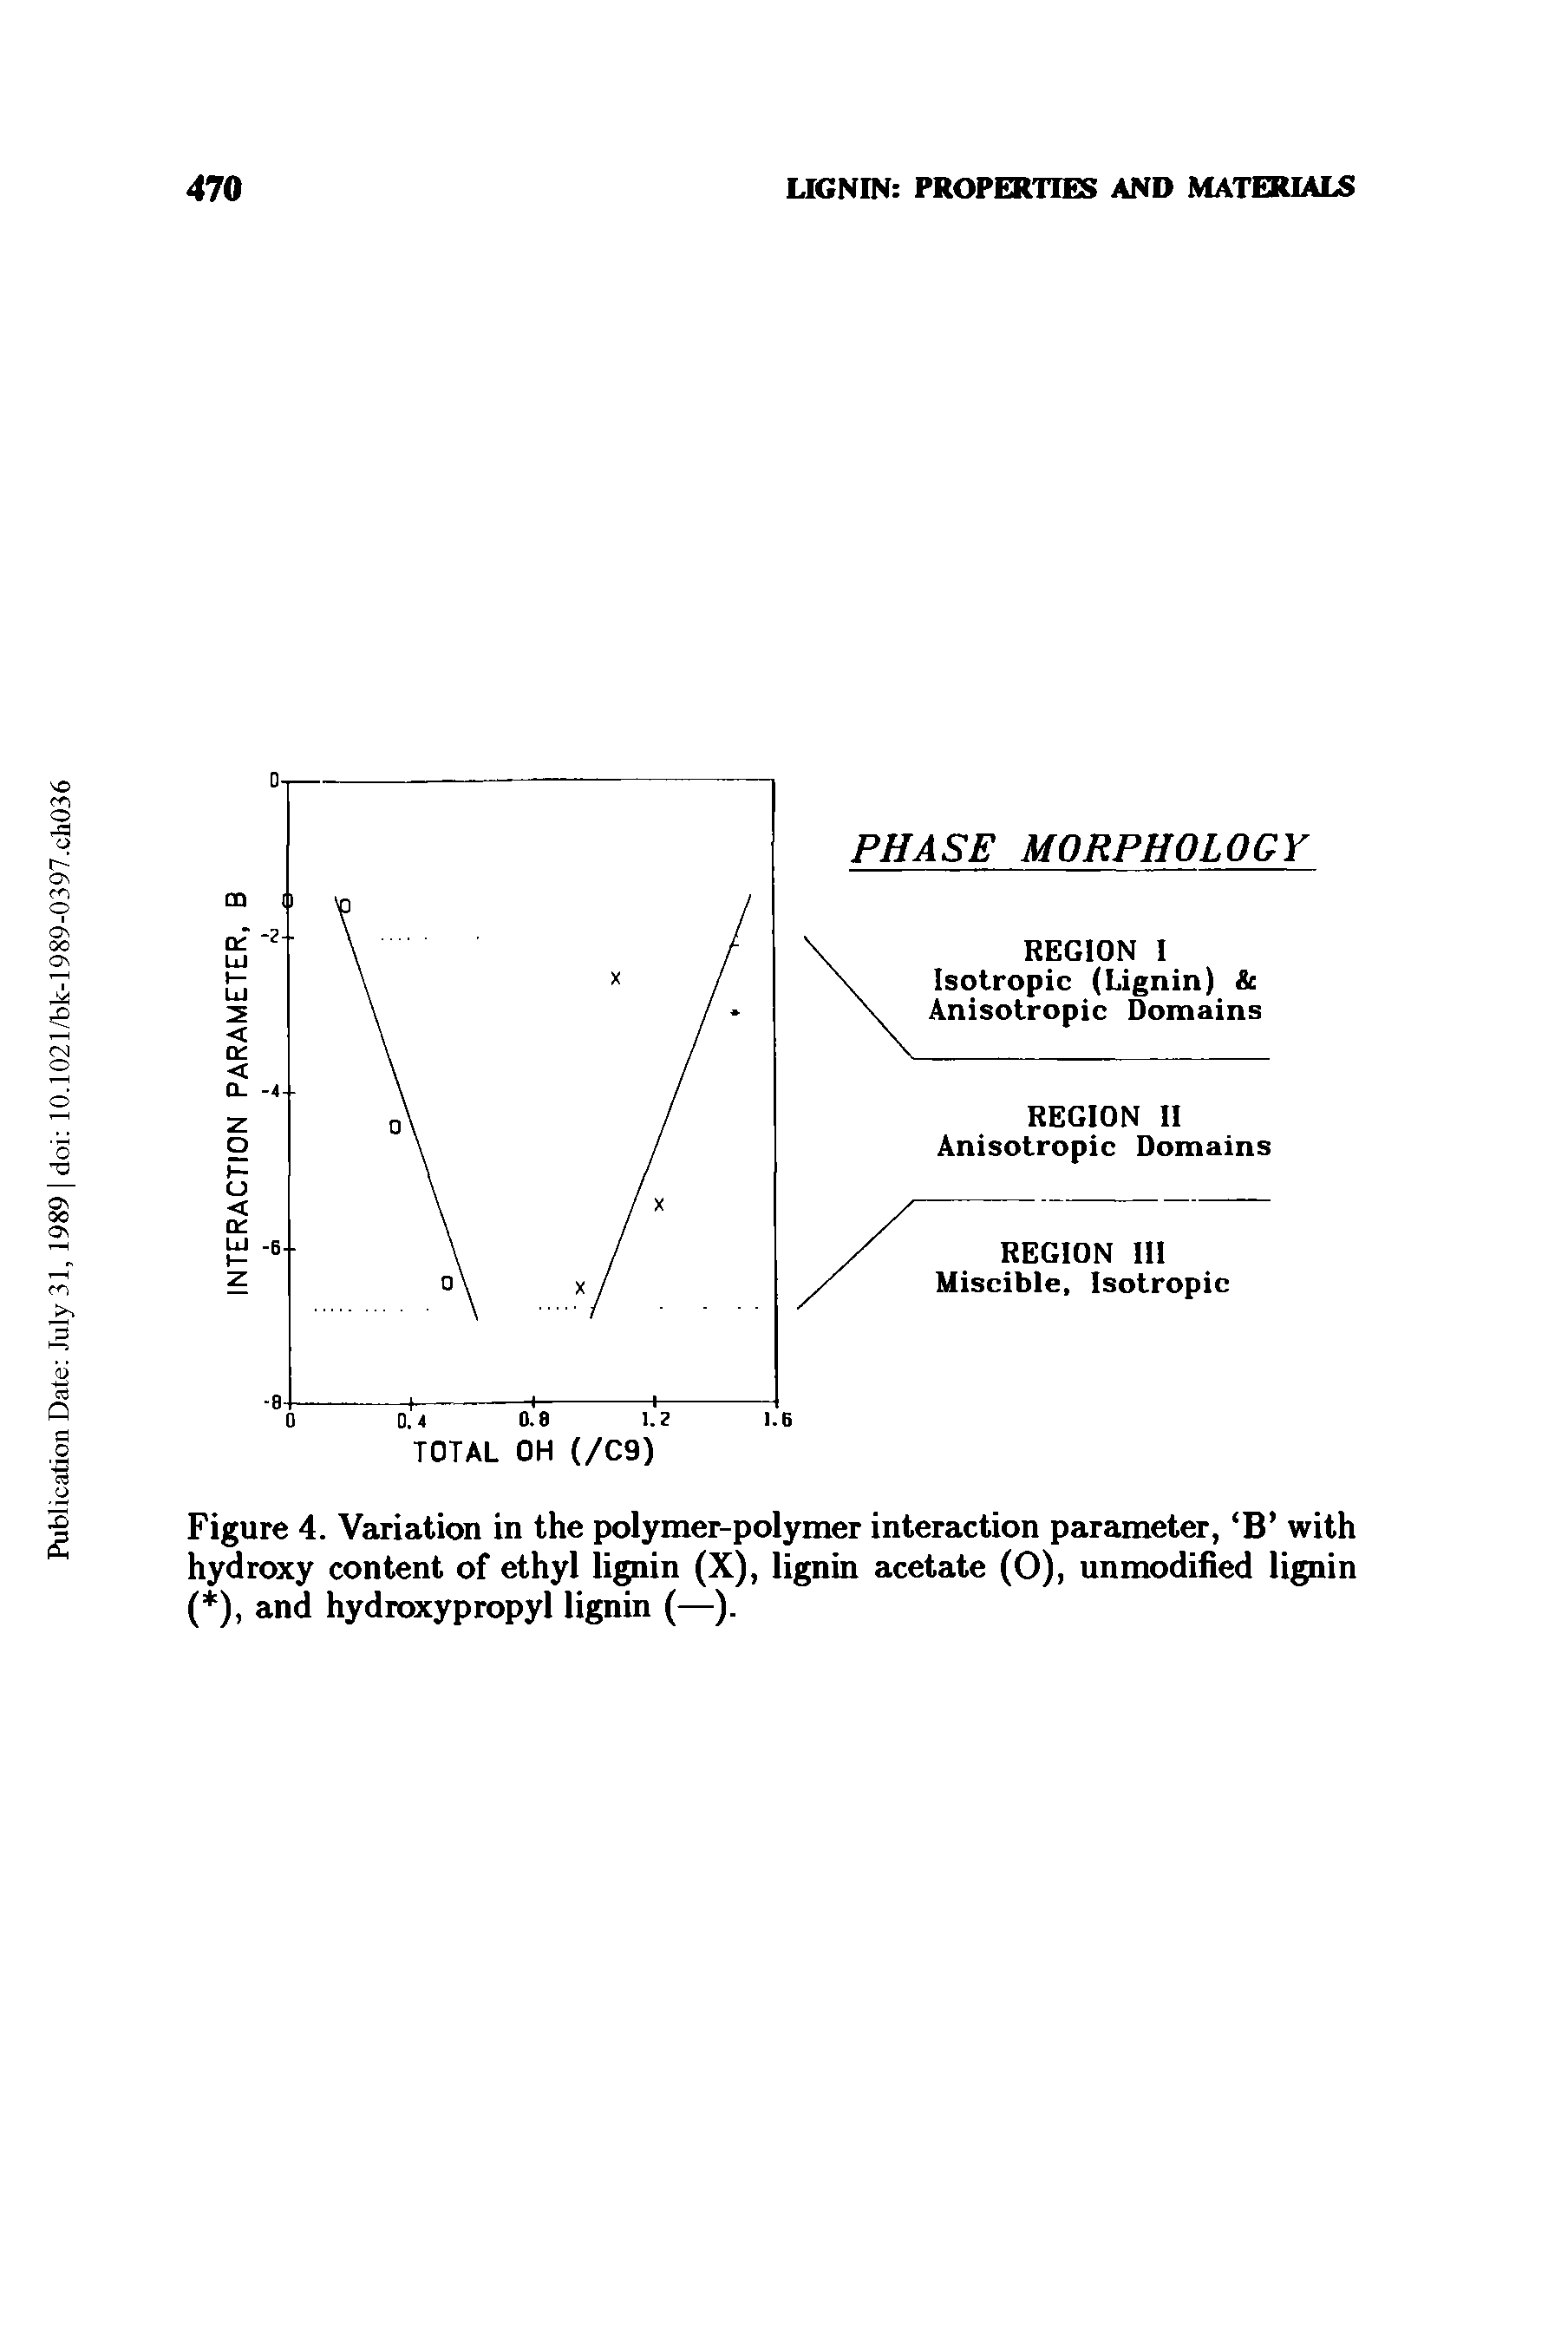 Figure 4. Variation in the polymer-polymer interaction parameter, B with hydroxy content of ethyl lignin (X), lignin acetate (O), unmodified lignin ( ), and hydroxypropyl lignin (—).